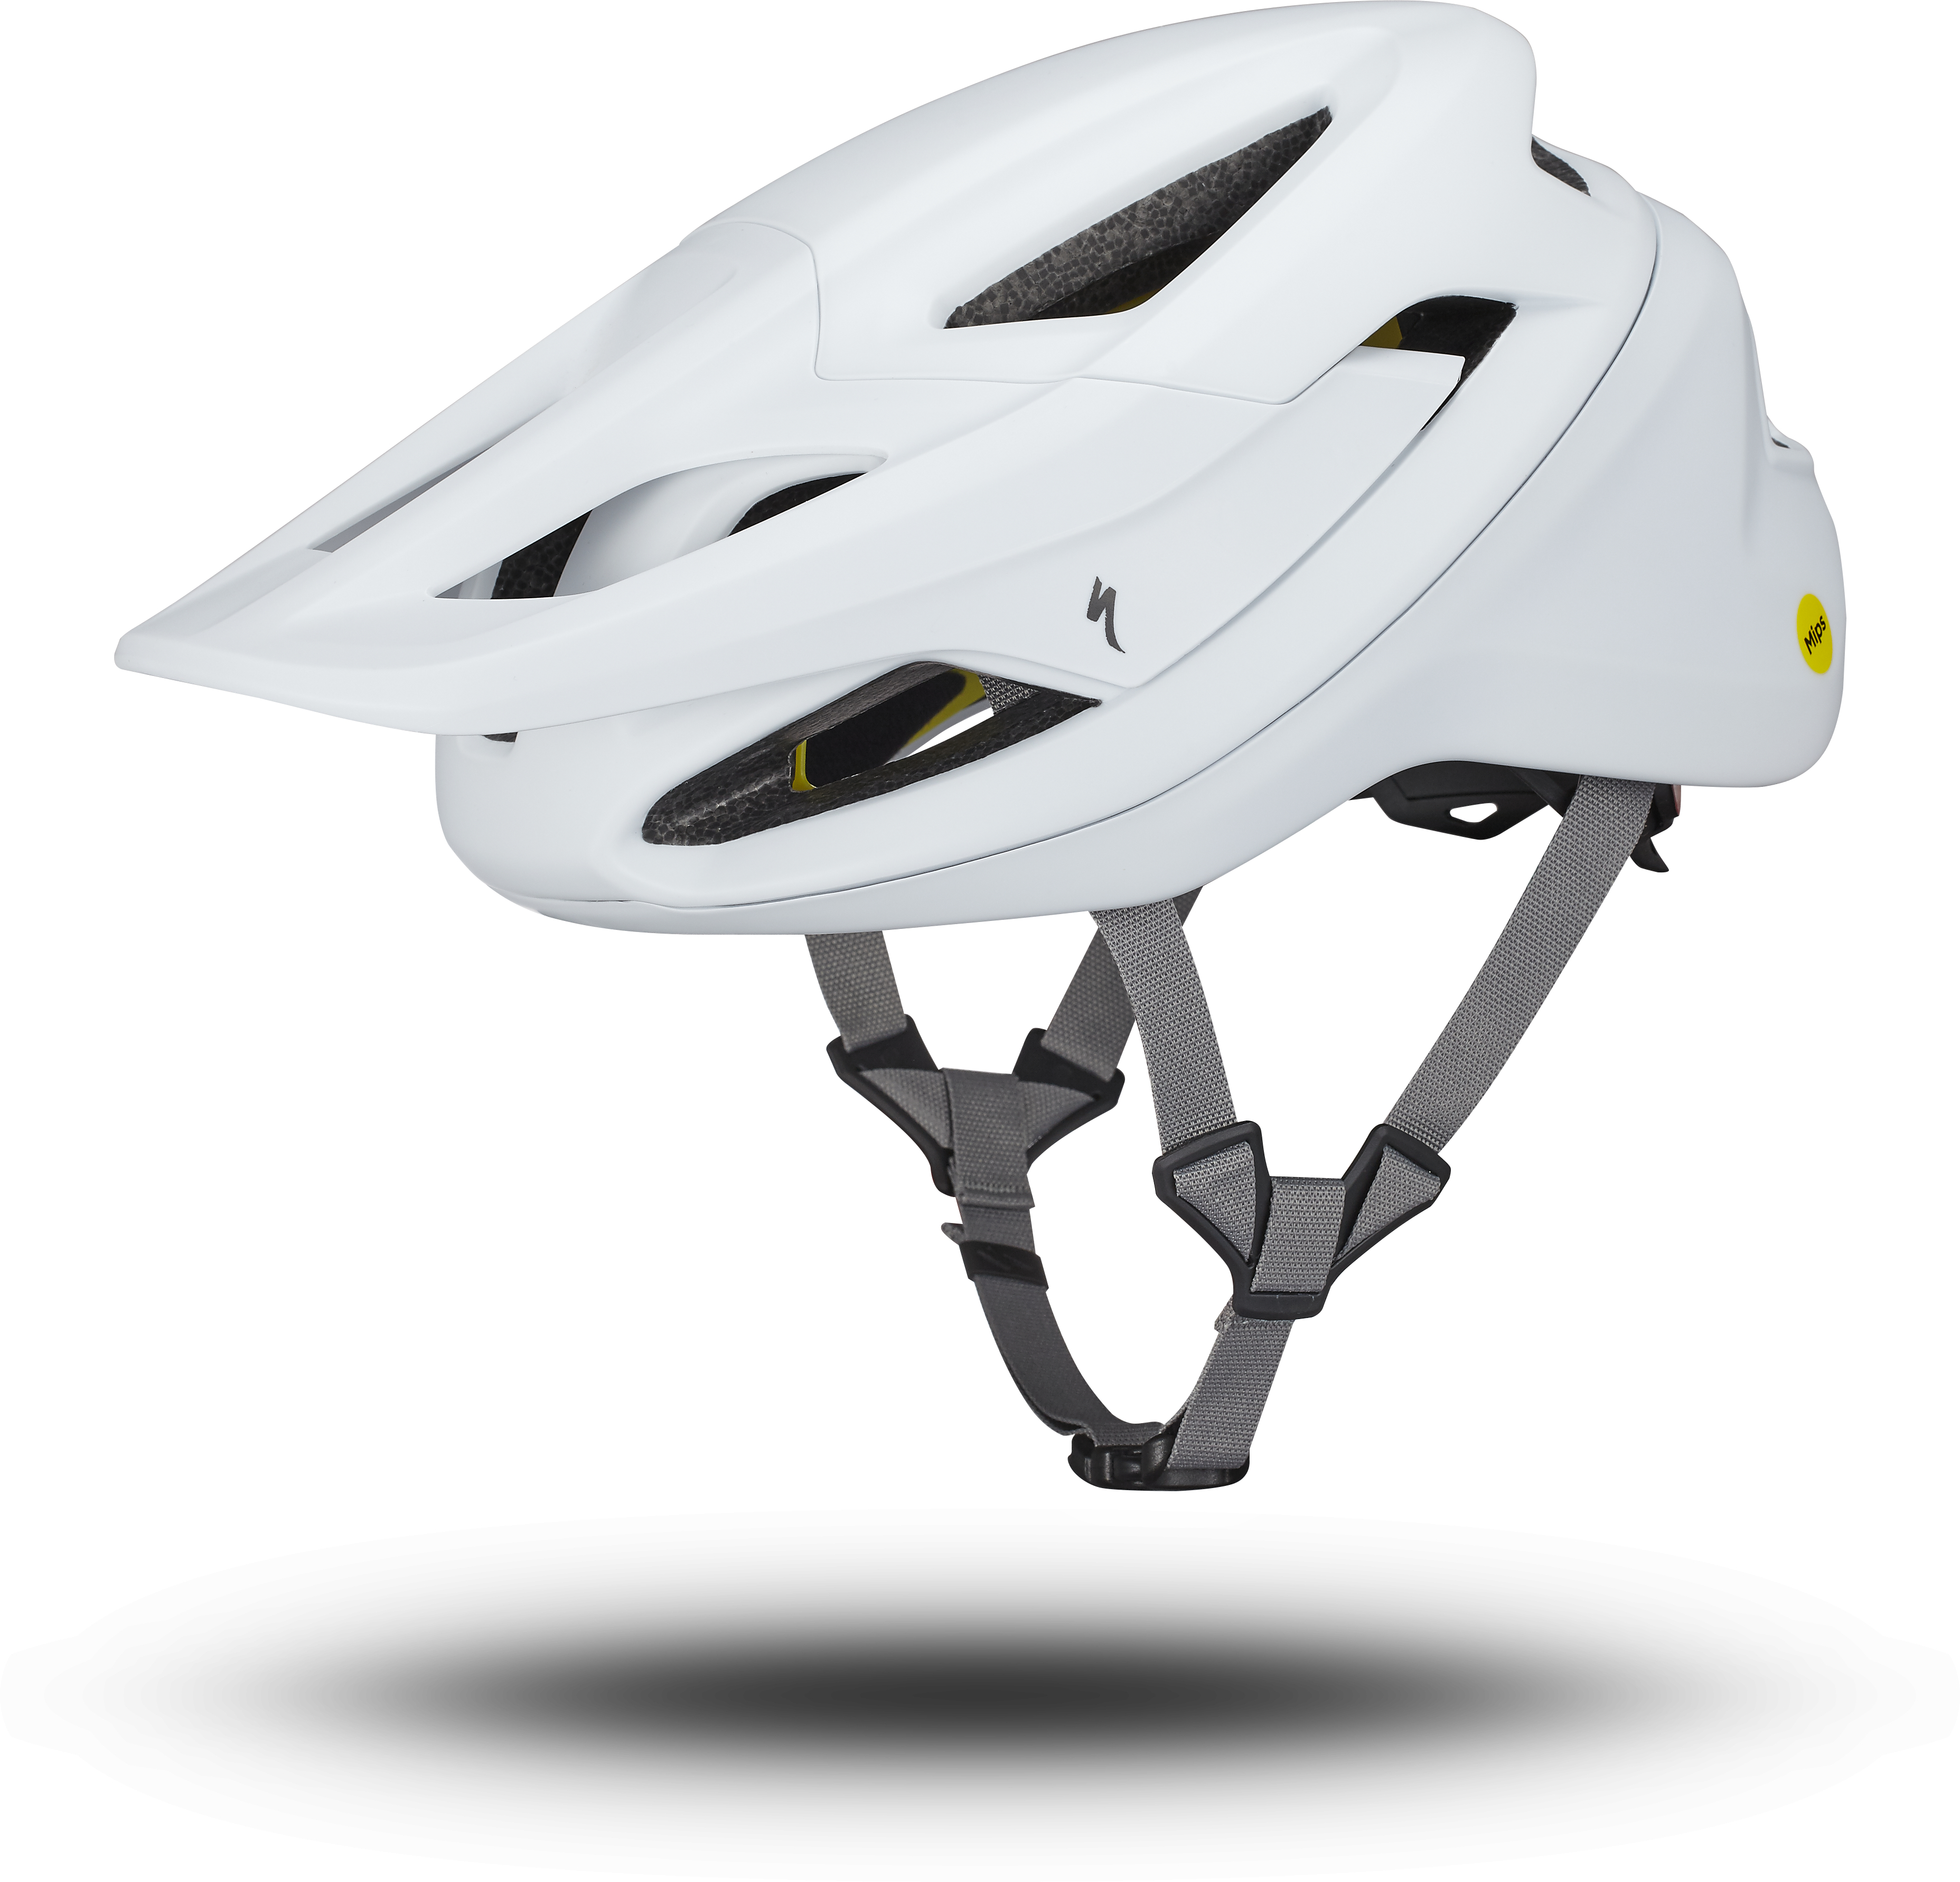 Cycles UK Specialized  Camber Mountain Bike Helmet X-LARGE White